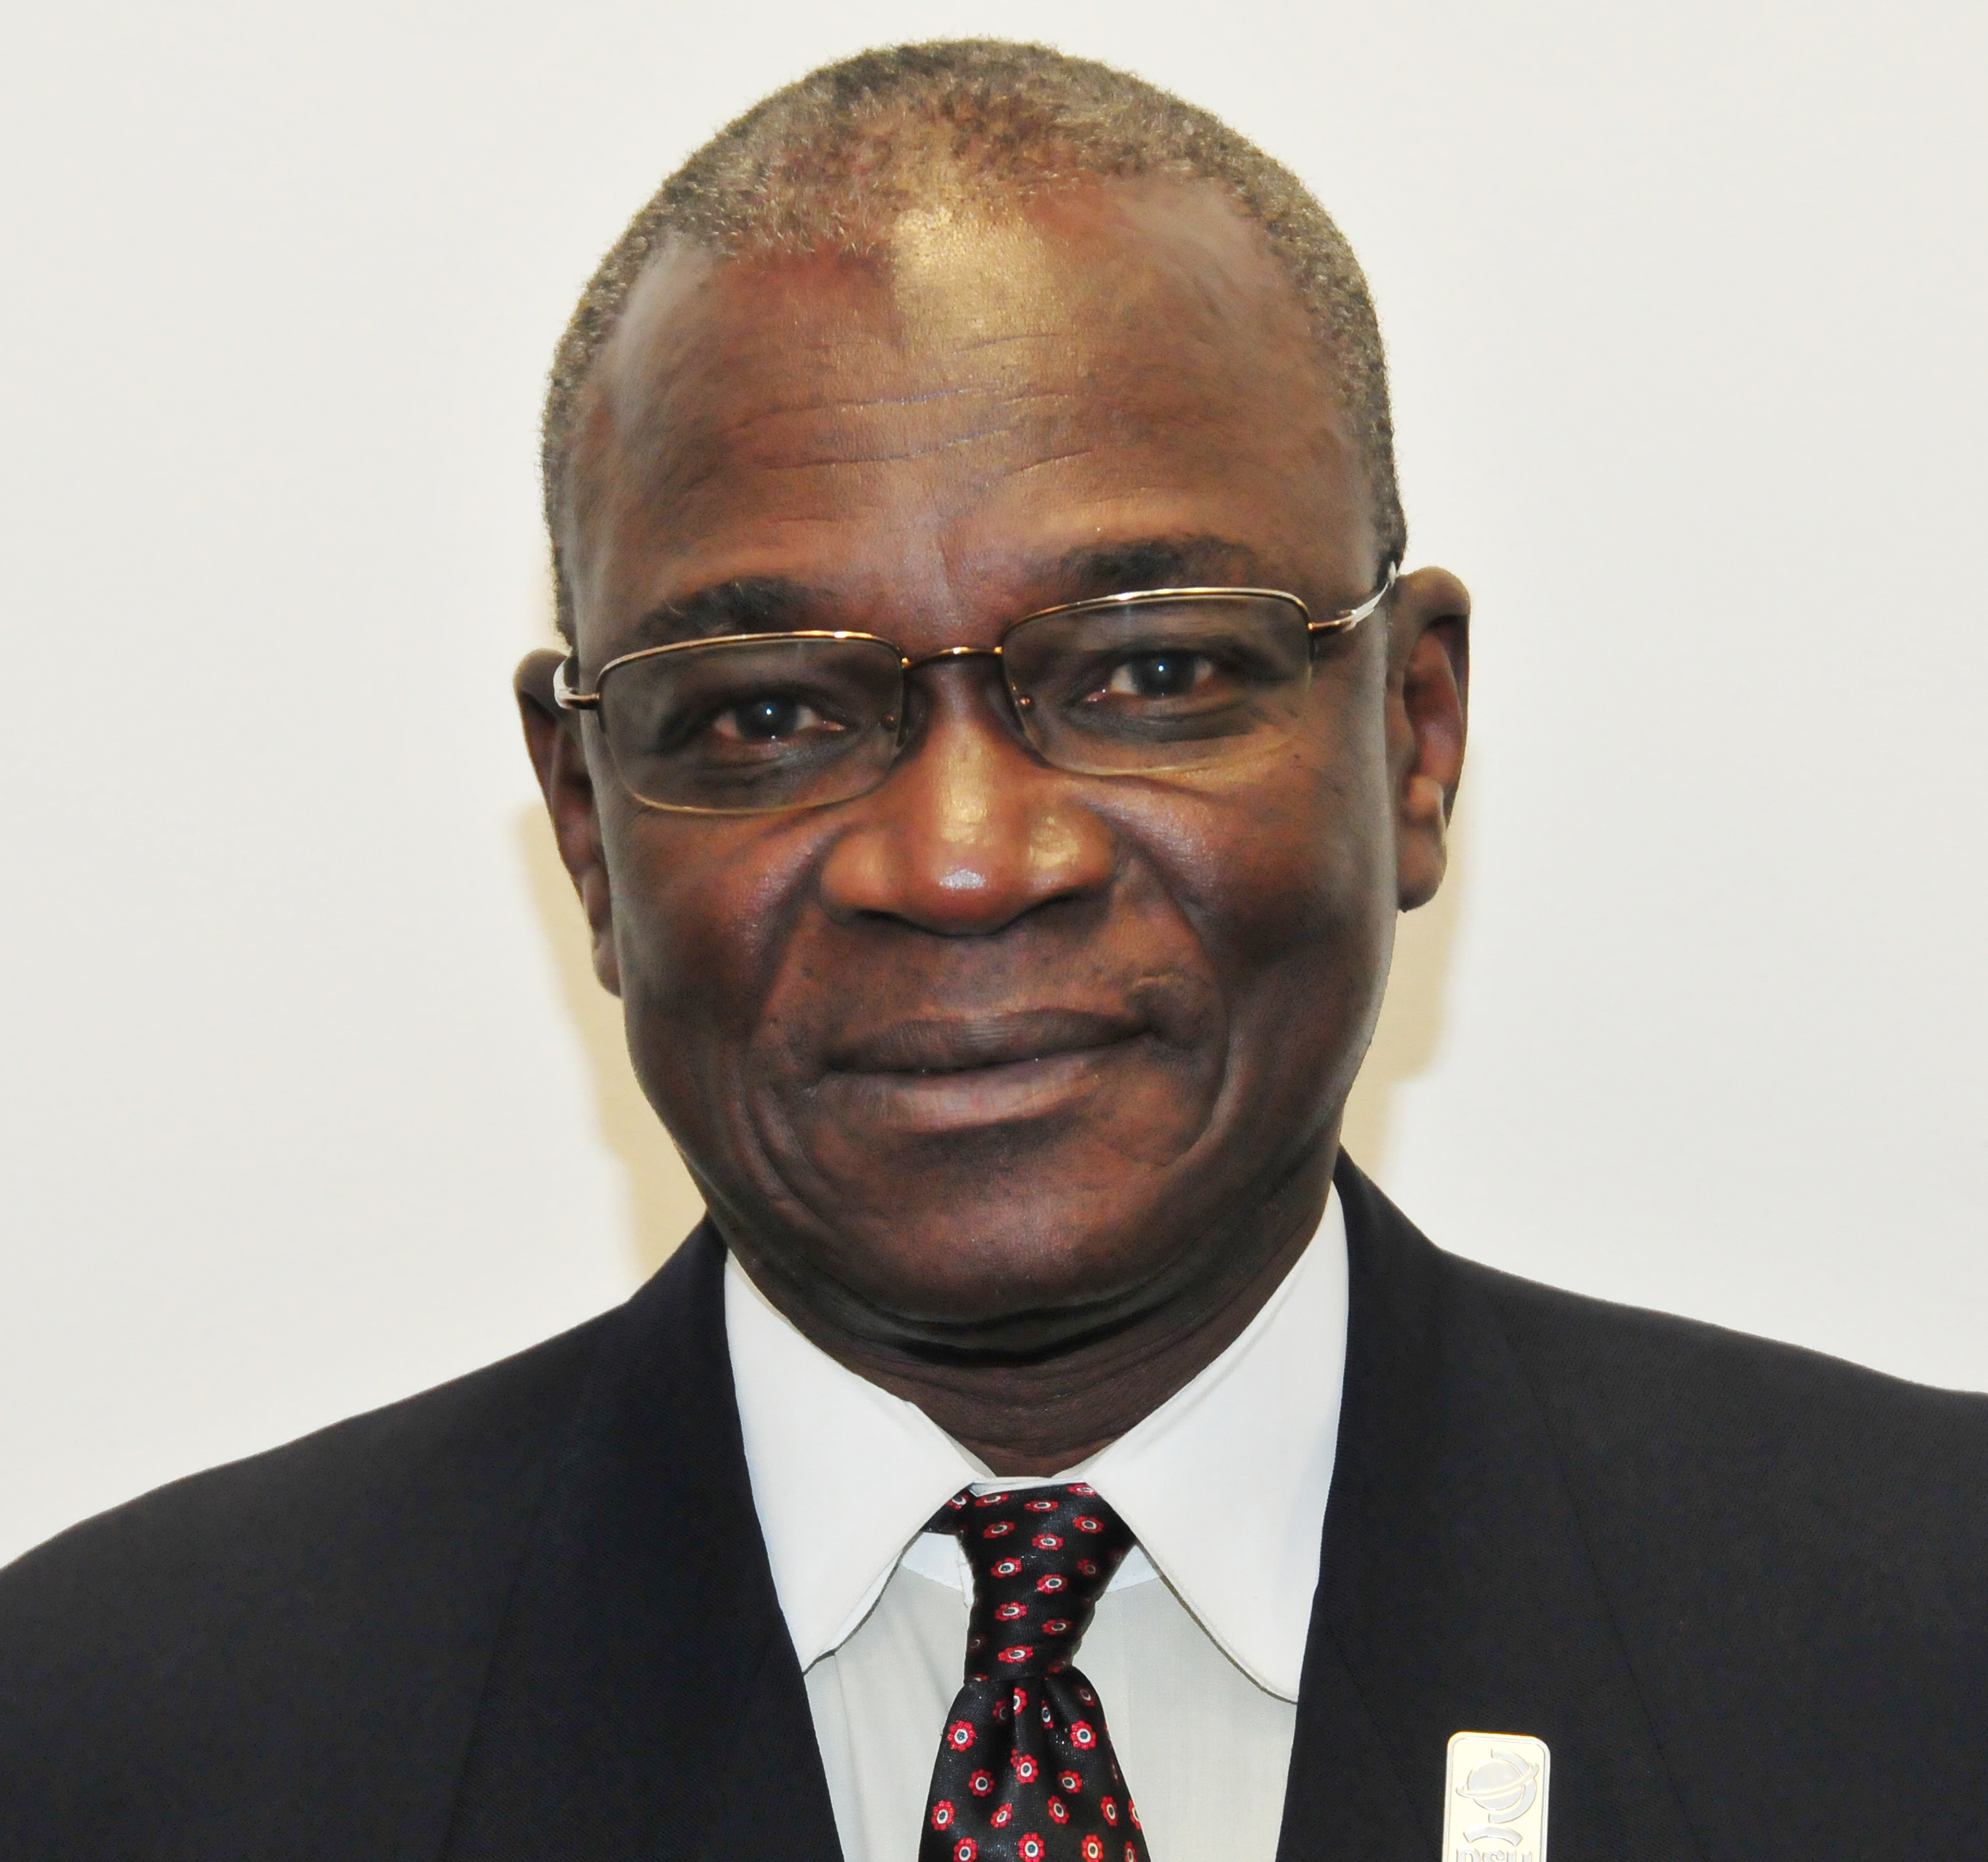 Dr. Ladji Sacko is a two-time Fulbright Scholar